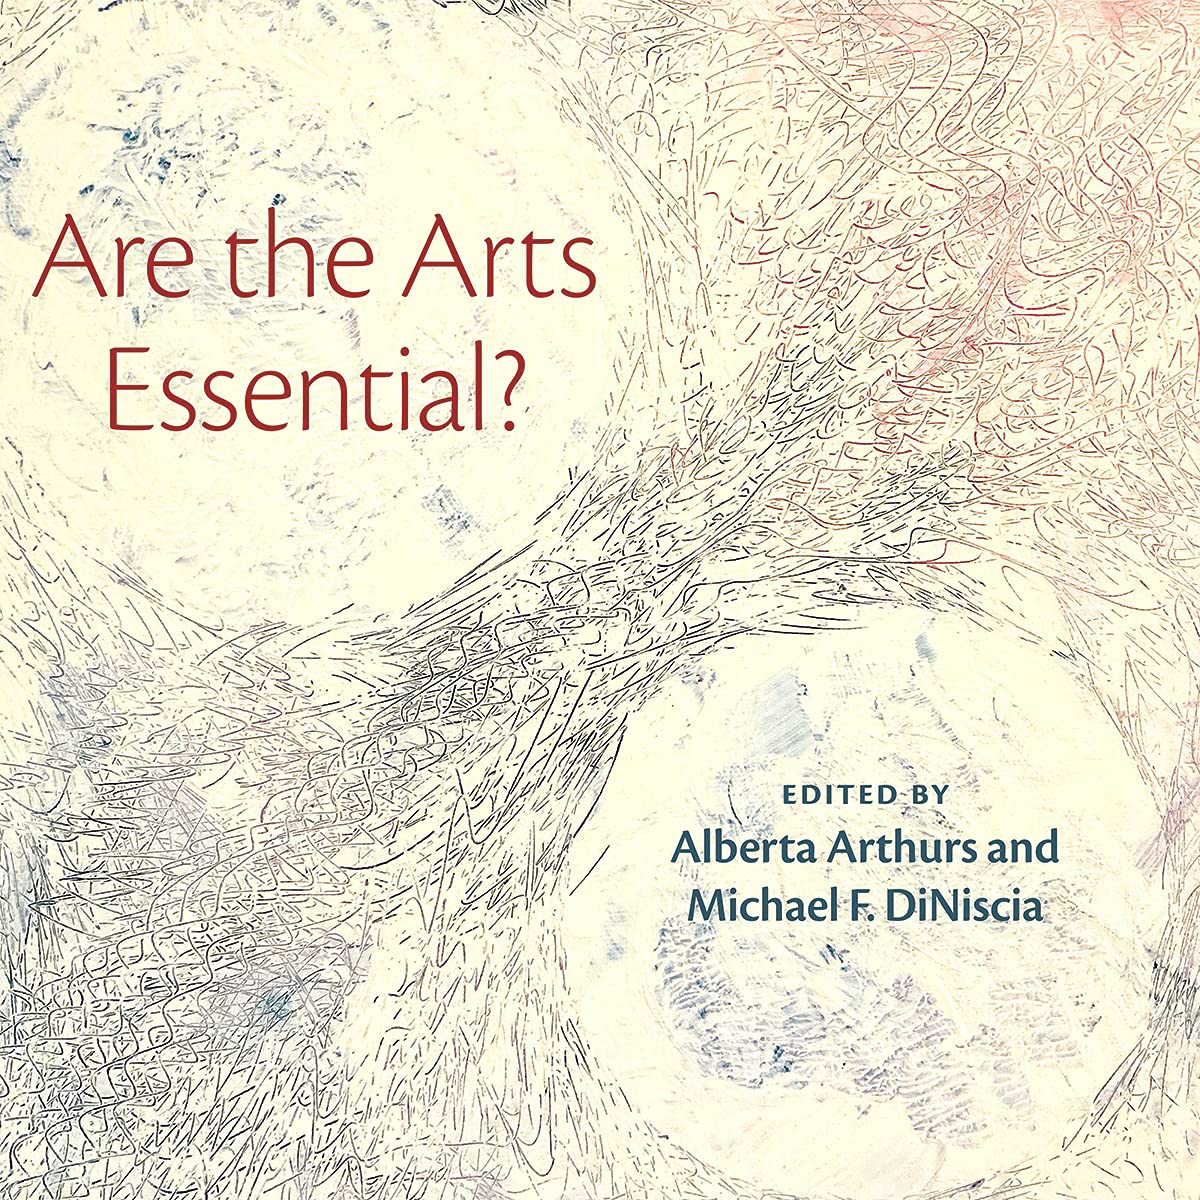 Are the Arts Essential